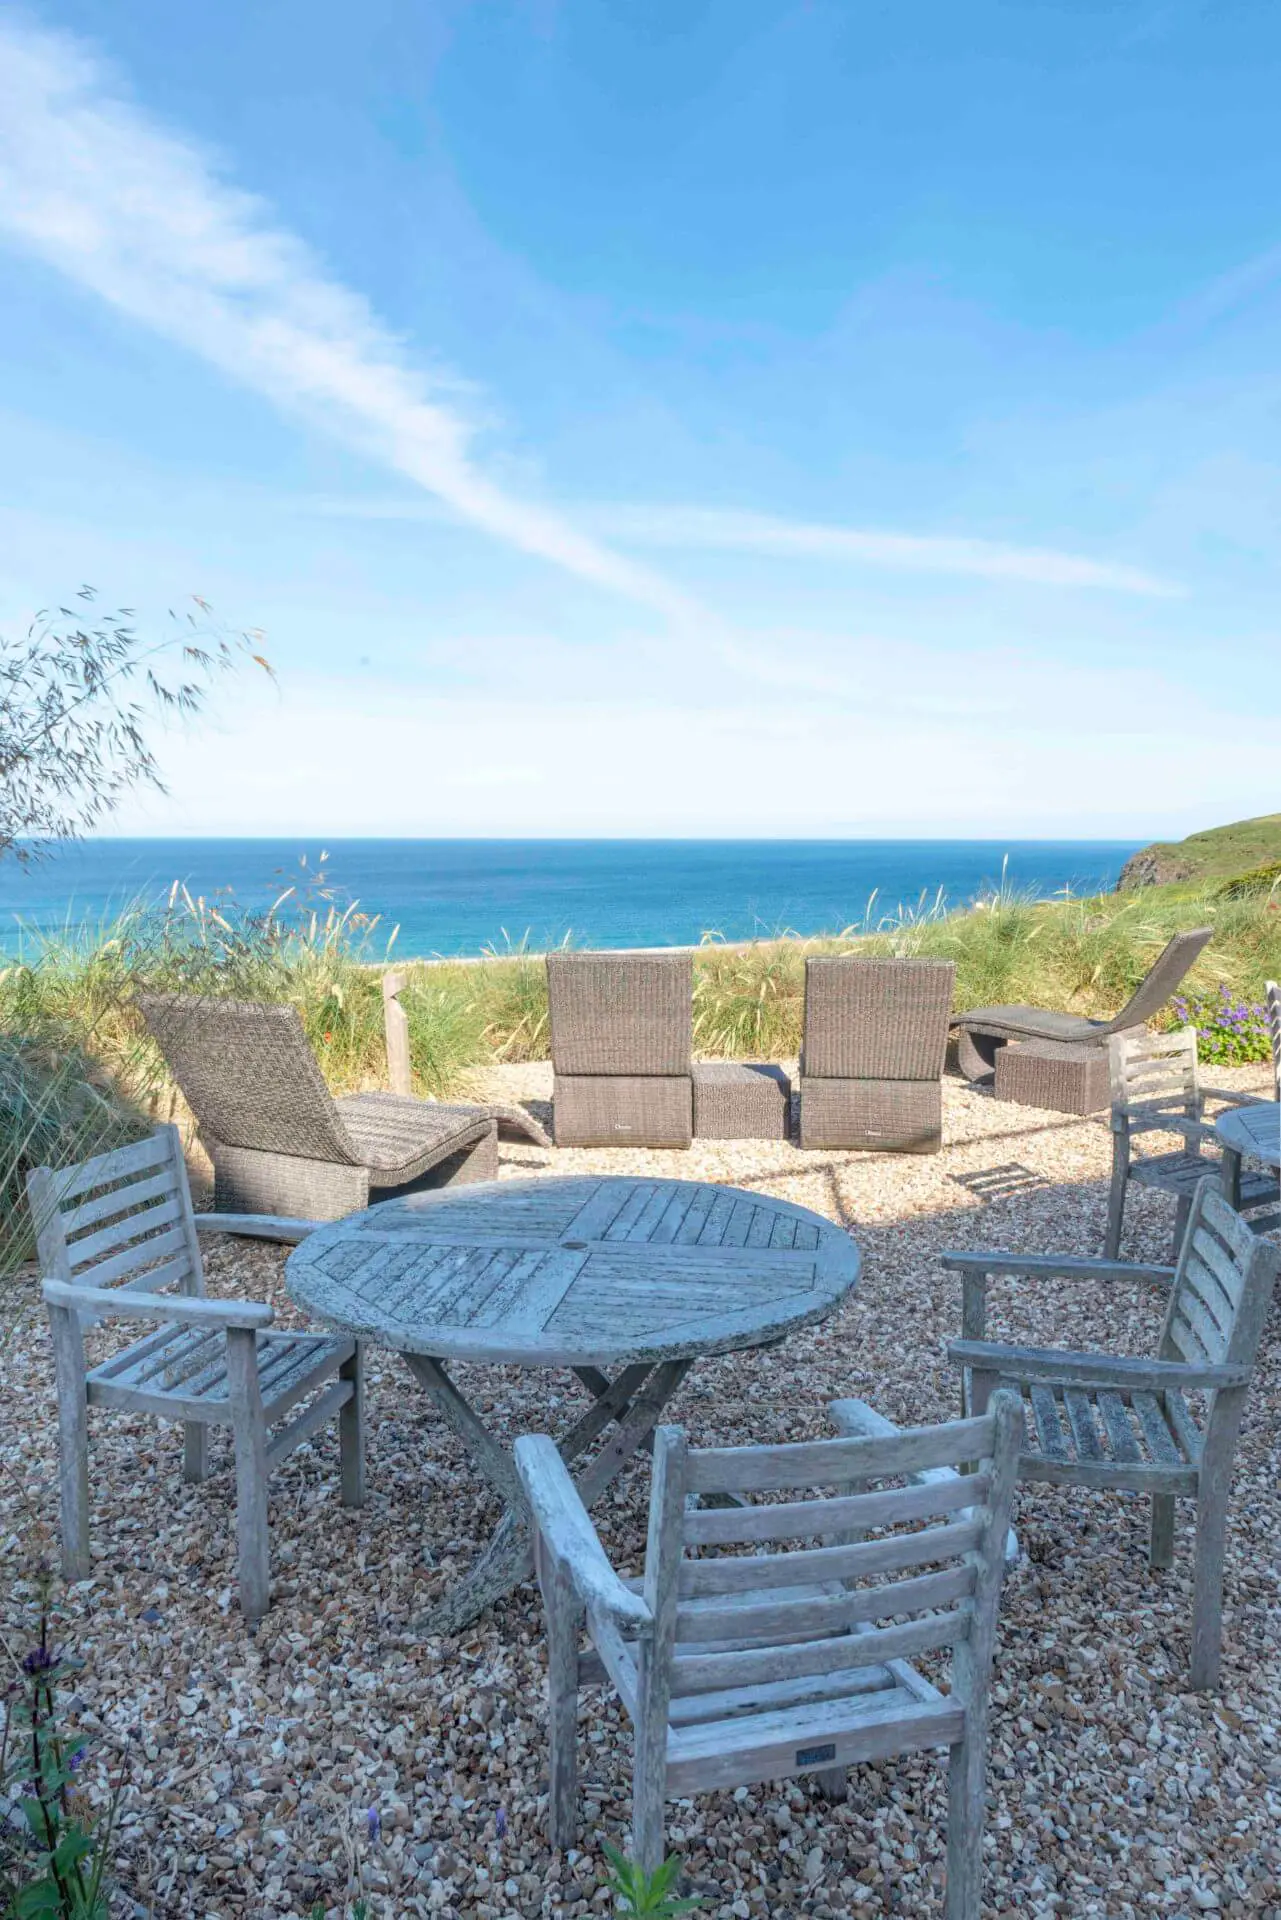 Outdoor Relaxation Area Overlooking The Ocean at Bedruthan Spa